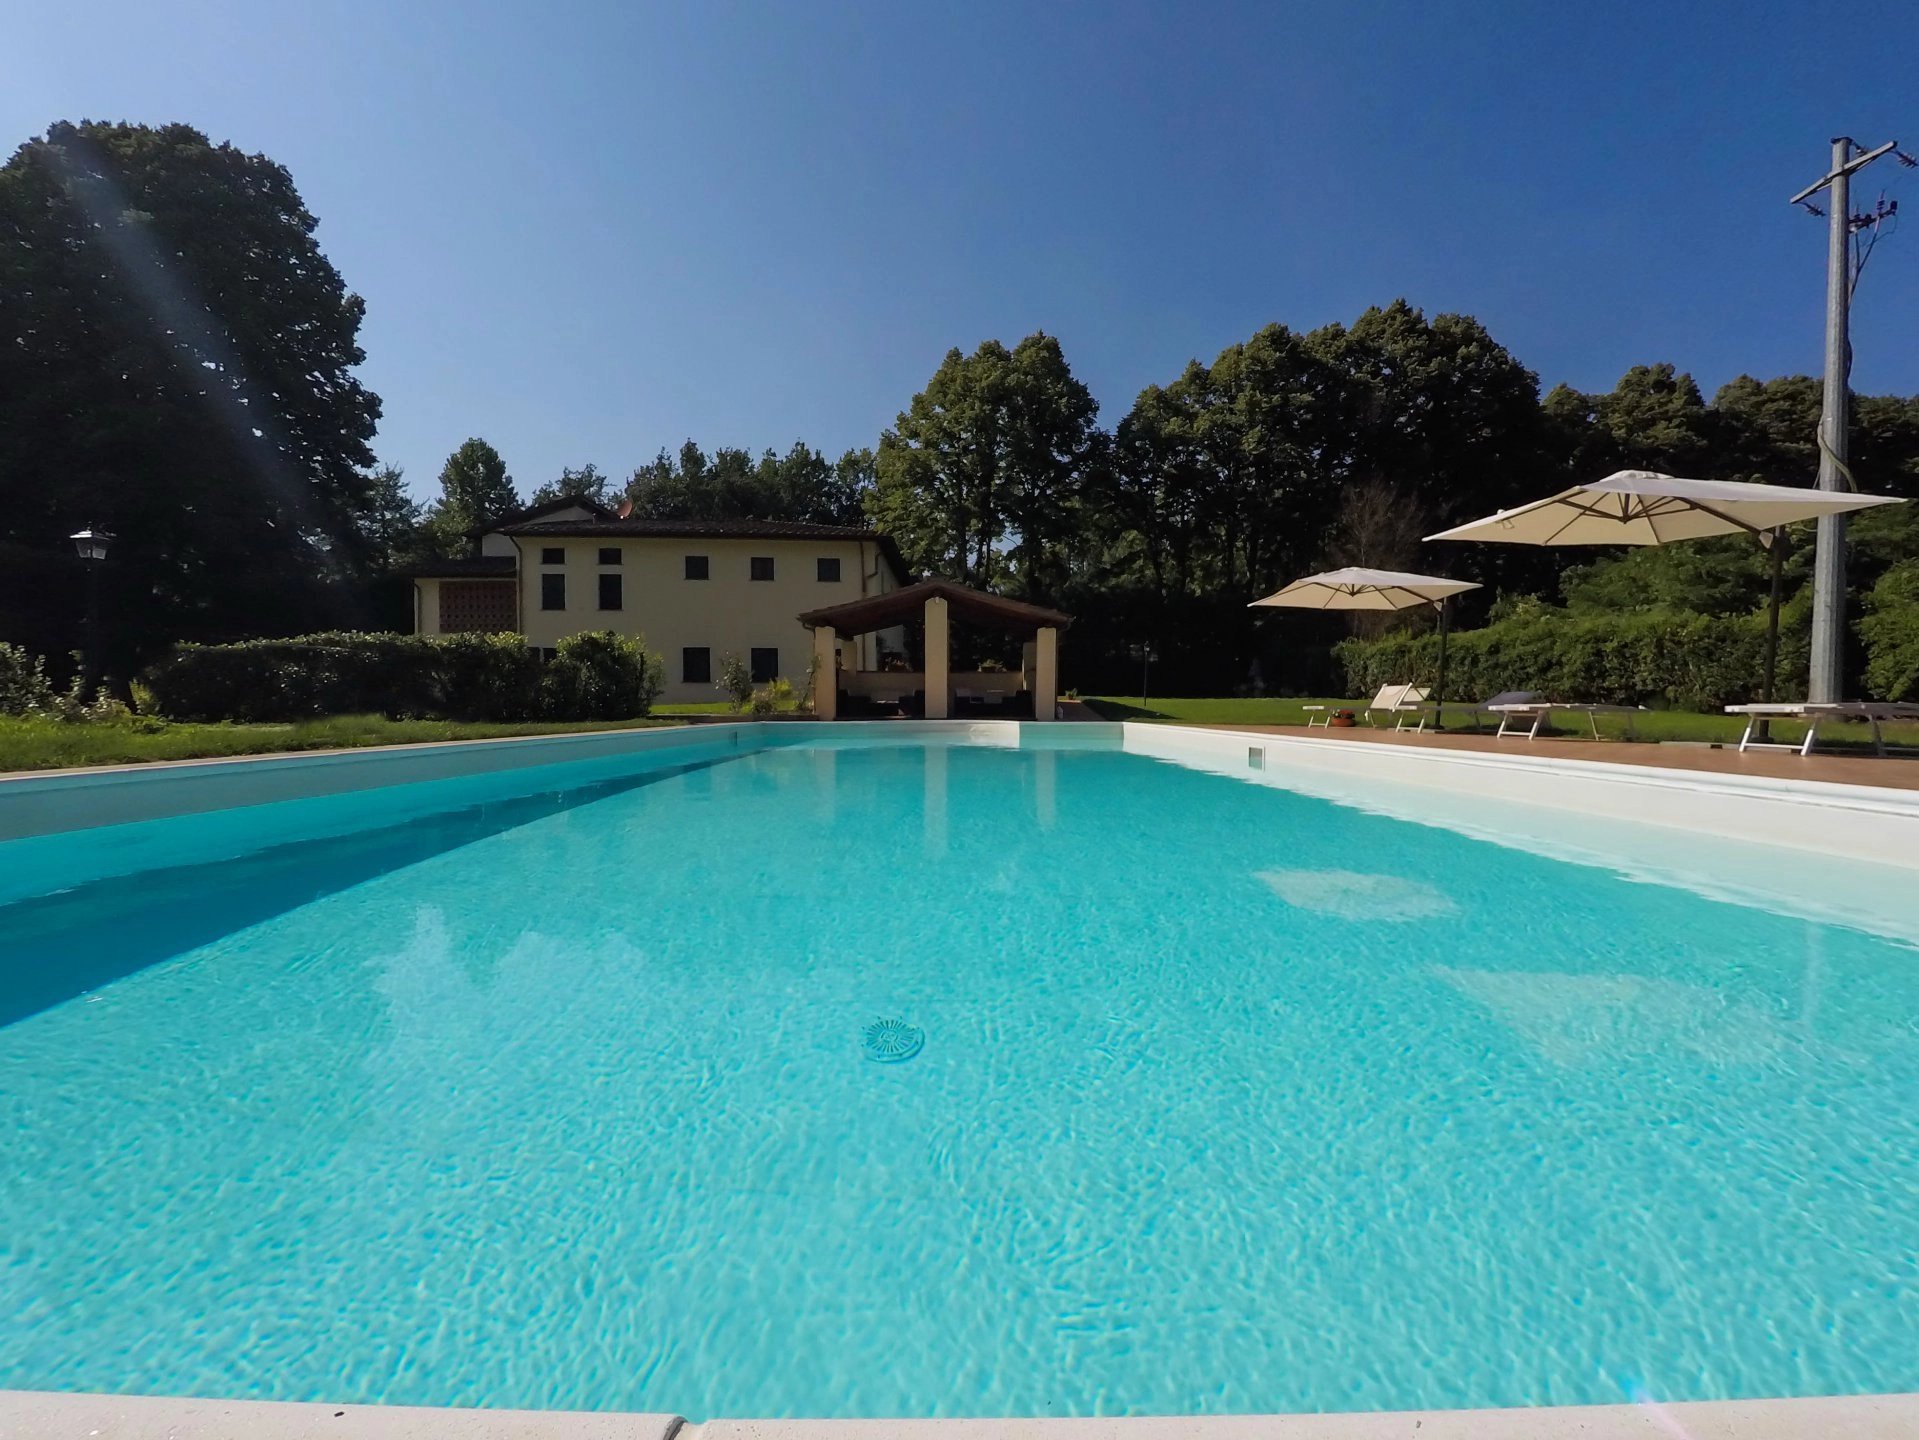 ITALY, TUSCANY, LUCCA, APARTMENT IN VILLA, 4 PERSONS, POOLITALY, TUSCANY, LUCCA, APARTMENT IN VILLA, 4 PERSONS, POOL